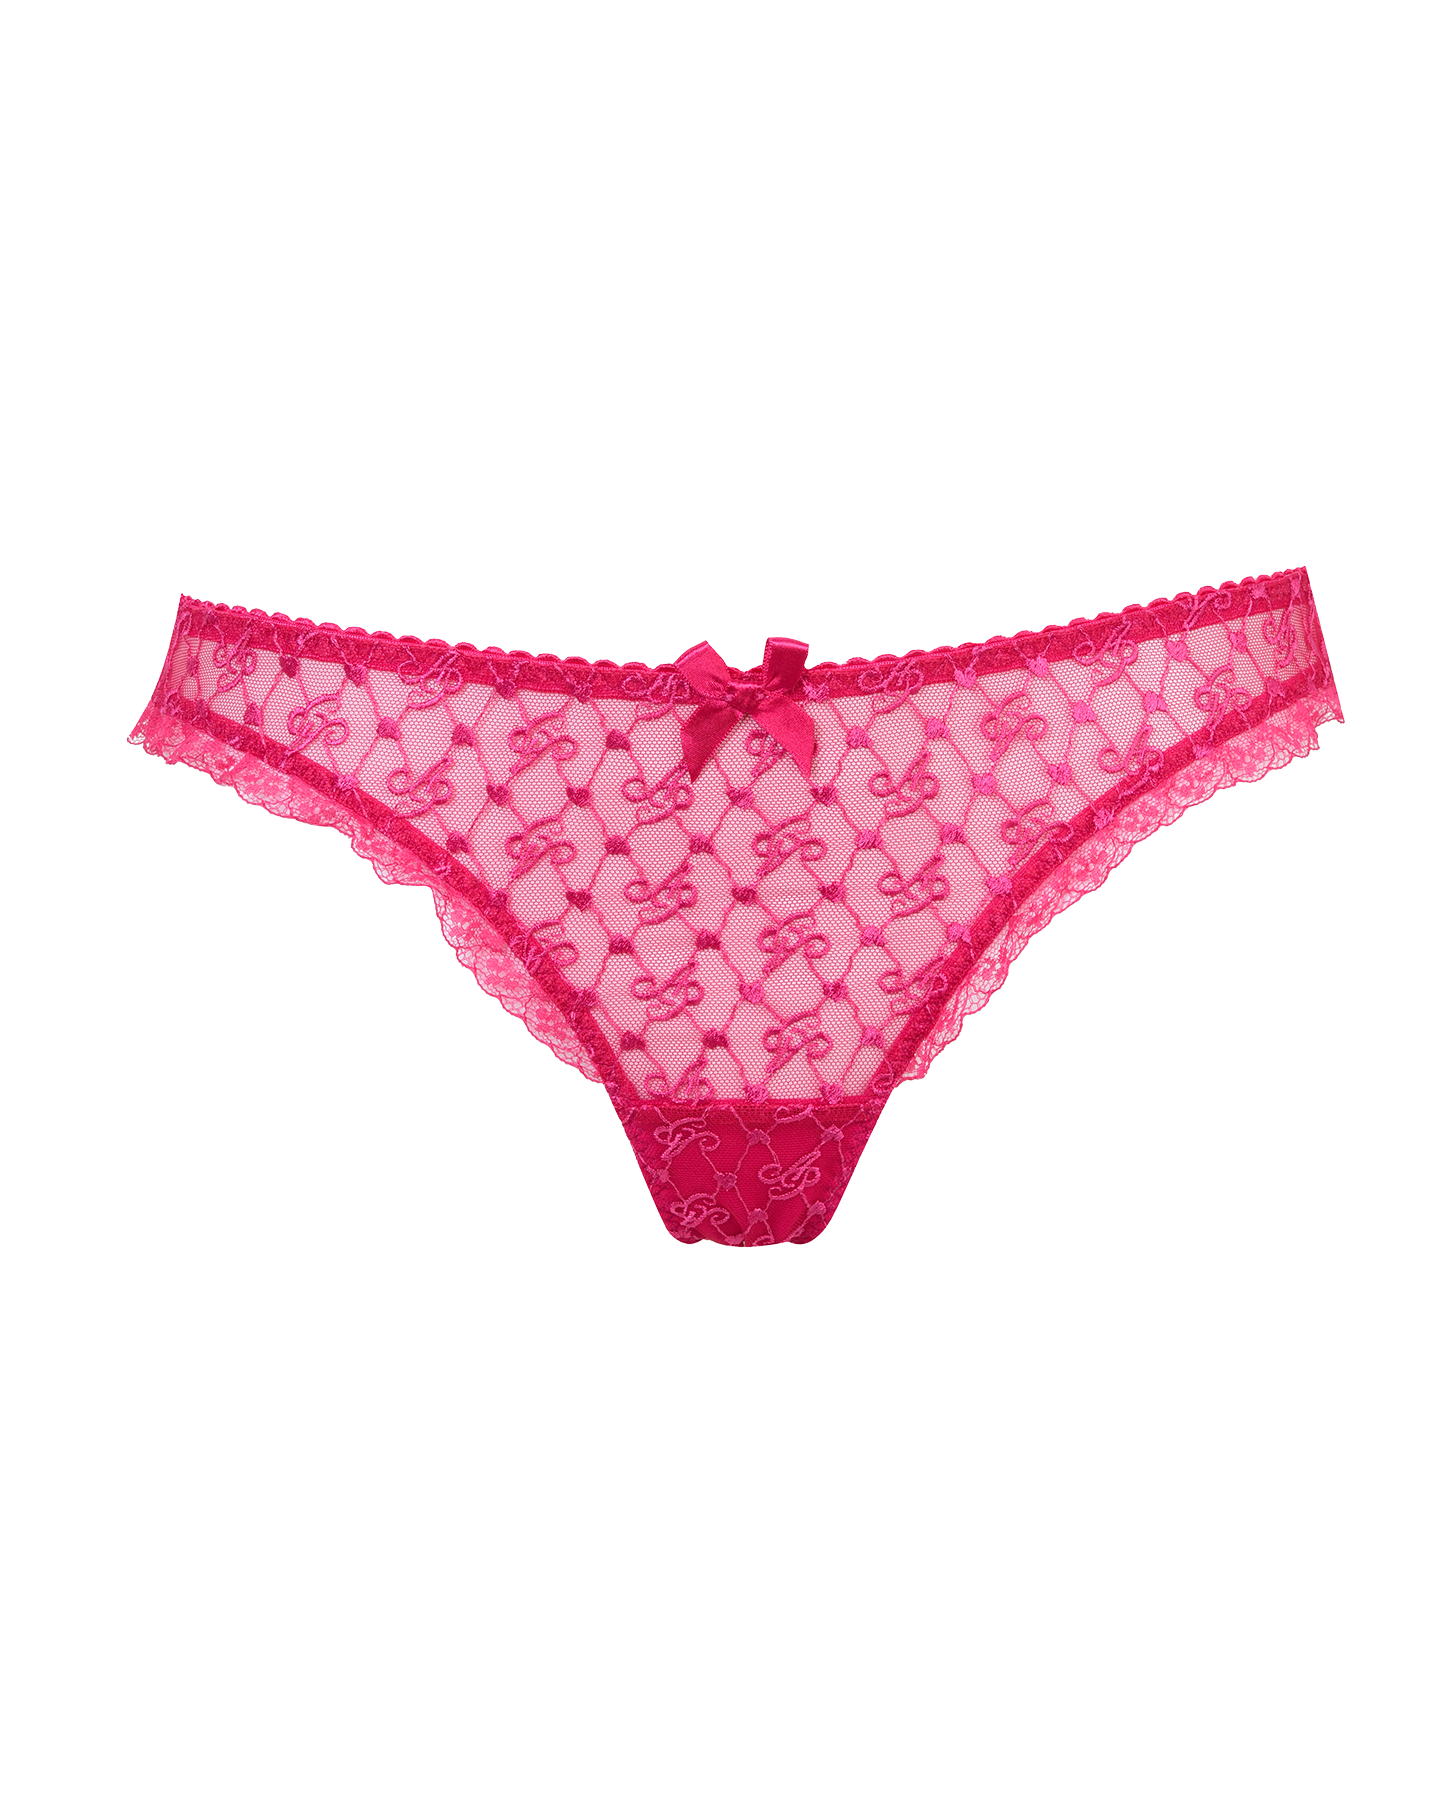 Dorotia Thong in Pink | By Agent Provocateur patest